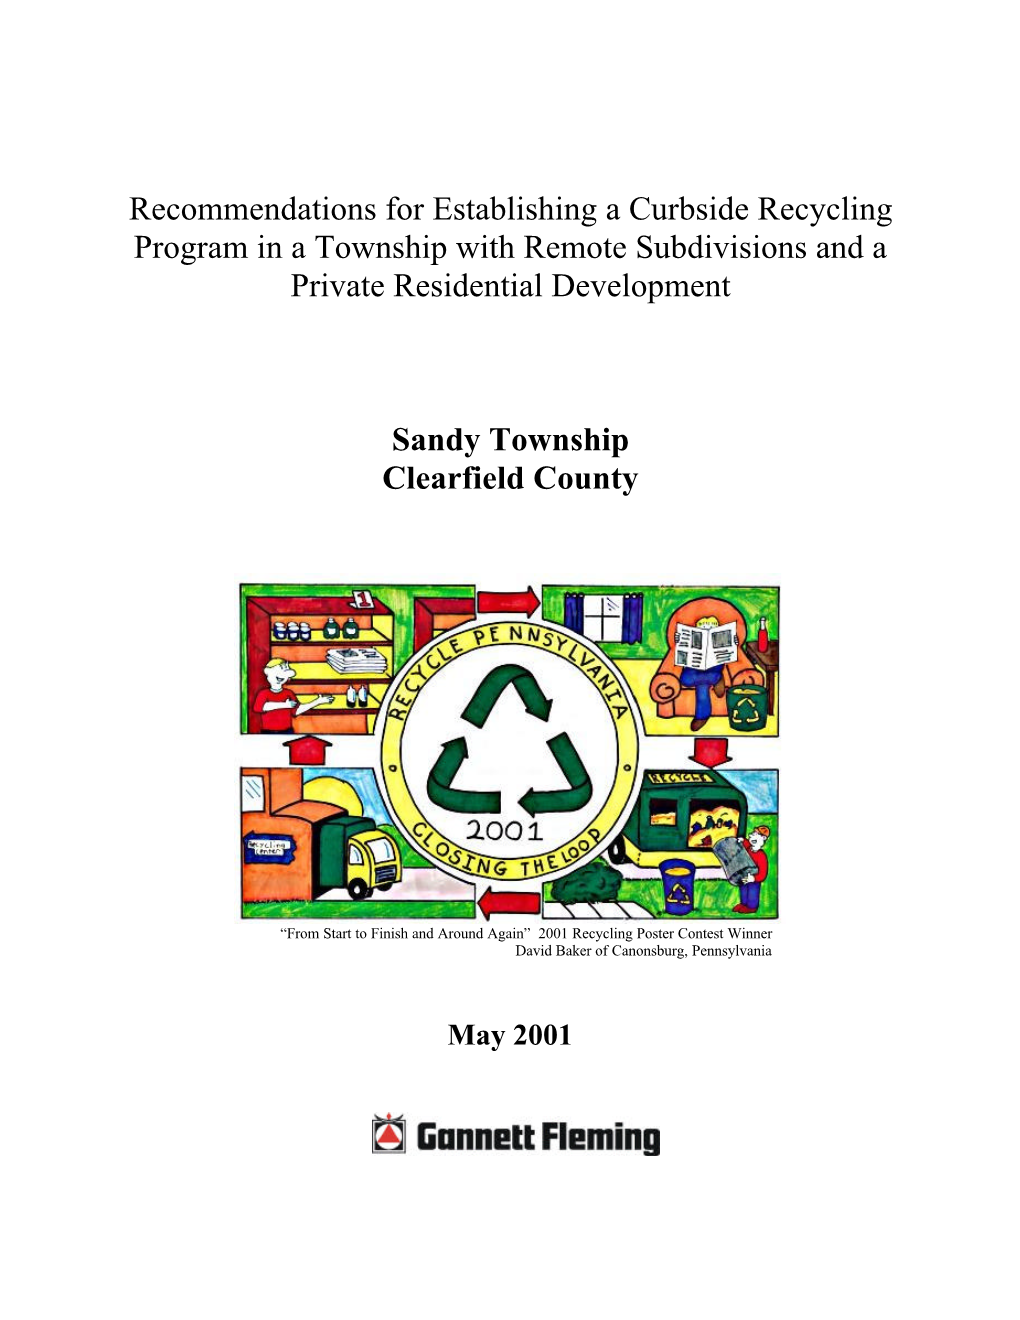 Curbside Recycling for Sandy Township, Private Residential Development and Remote Subdivisions